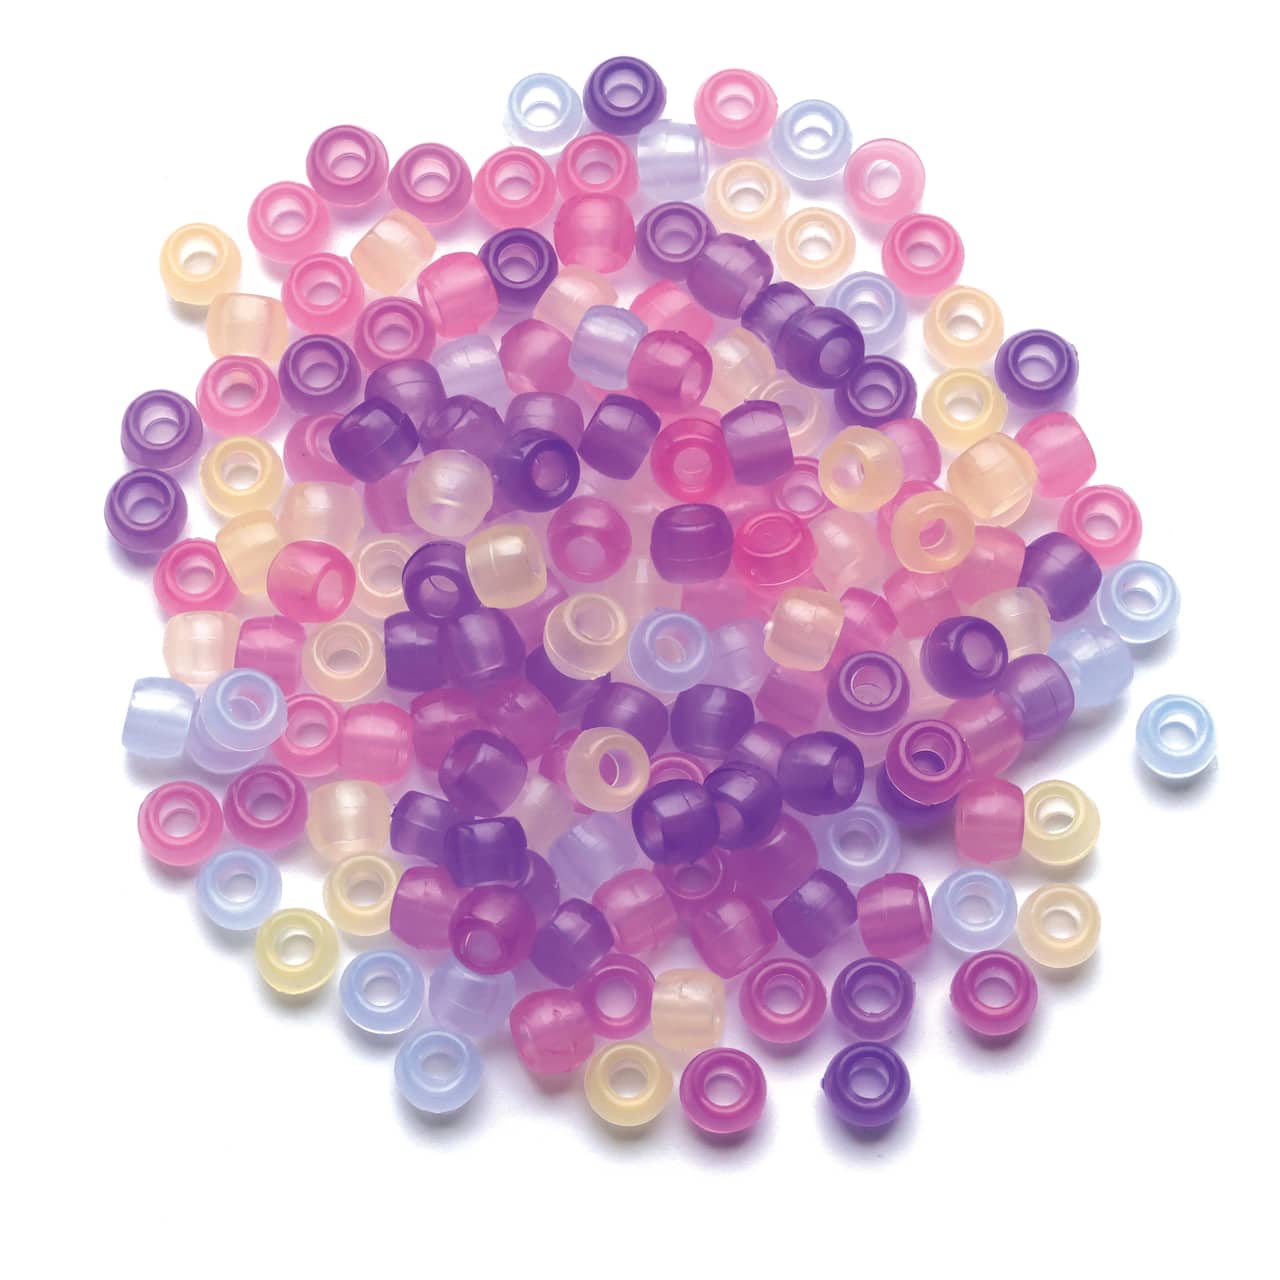 12 Packs: 280 ct. (3,360 total) Color Change Clear Pony Beads by  Creatology™, 6mm x 8mm